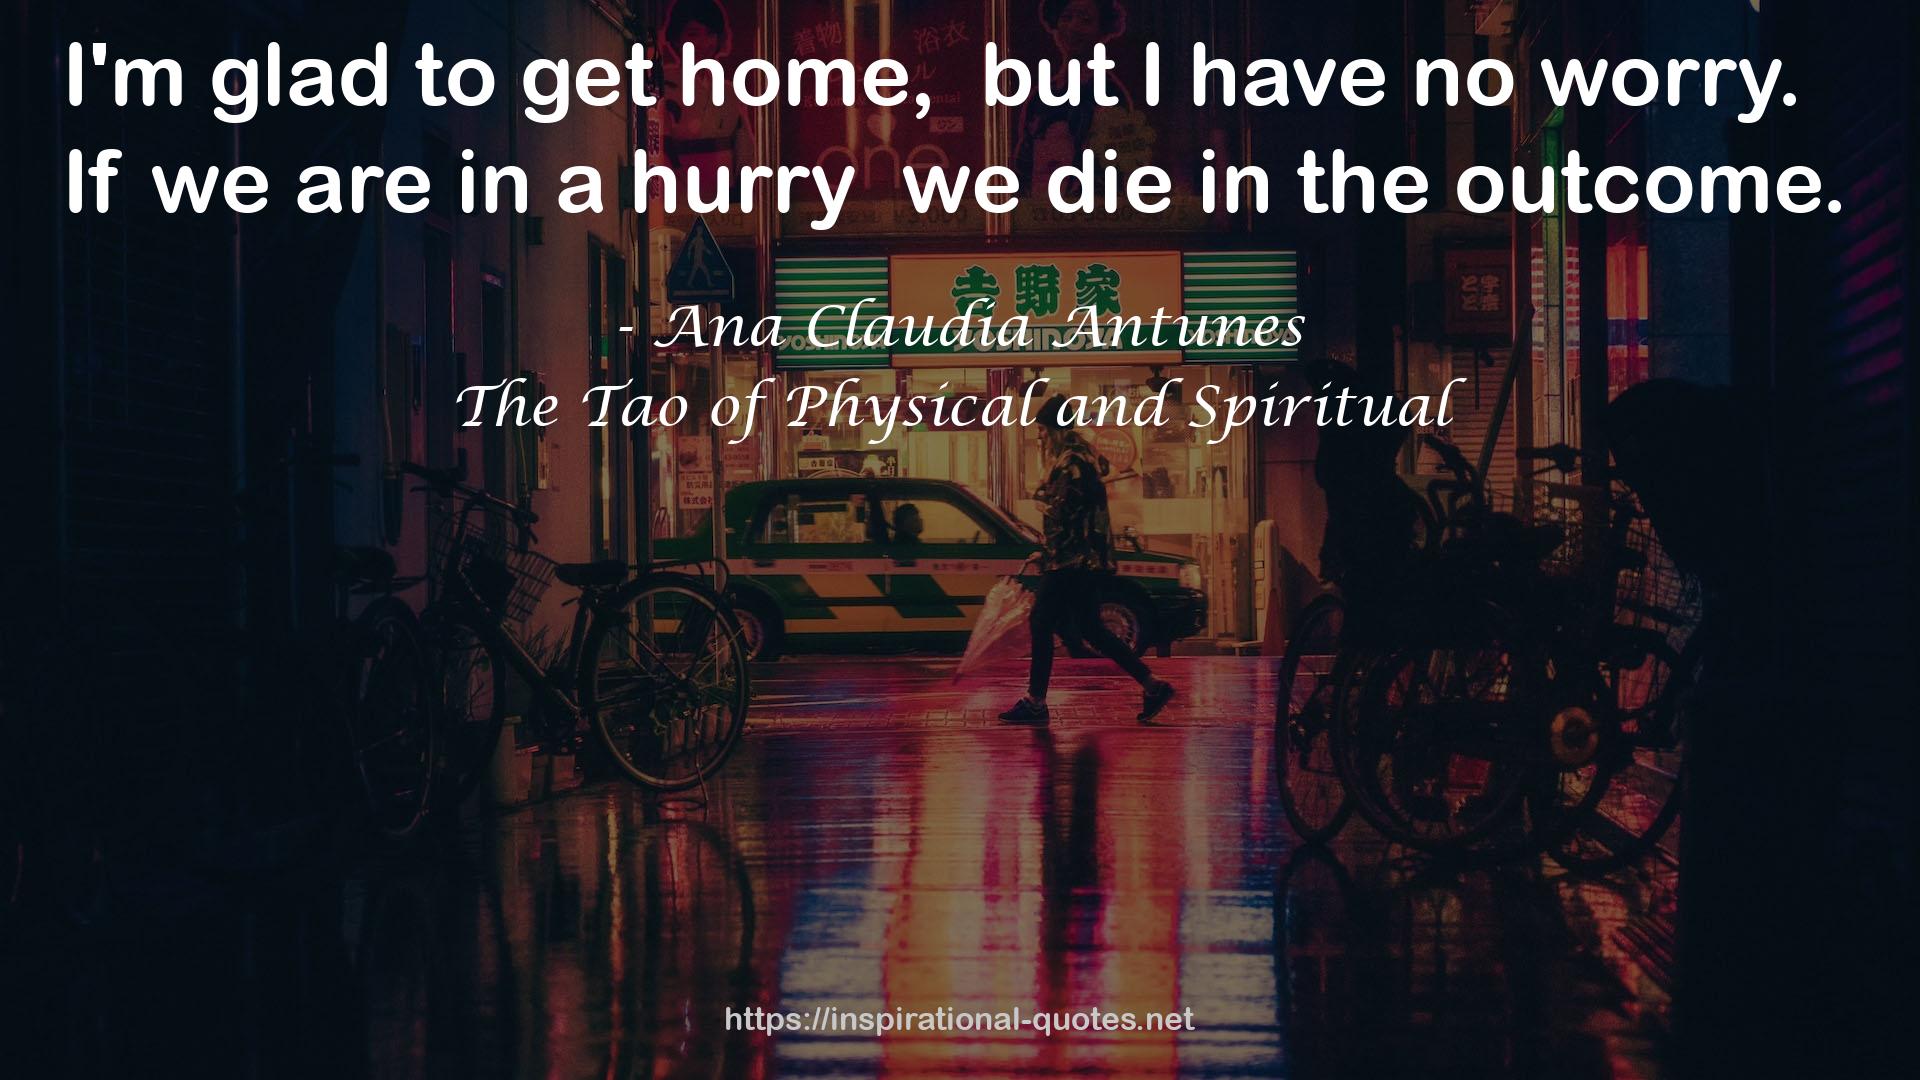 The Tao of Physical and Spiritual QUOTES